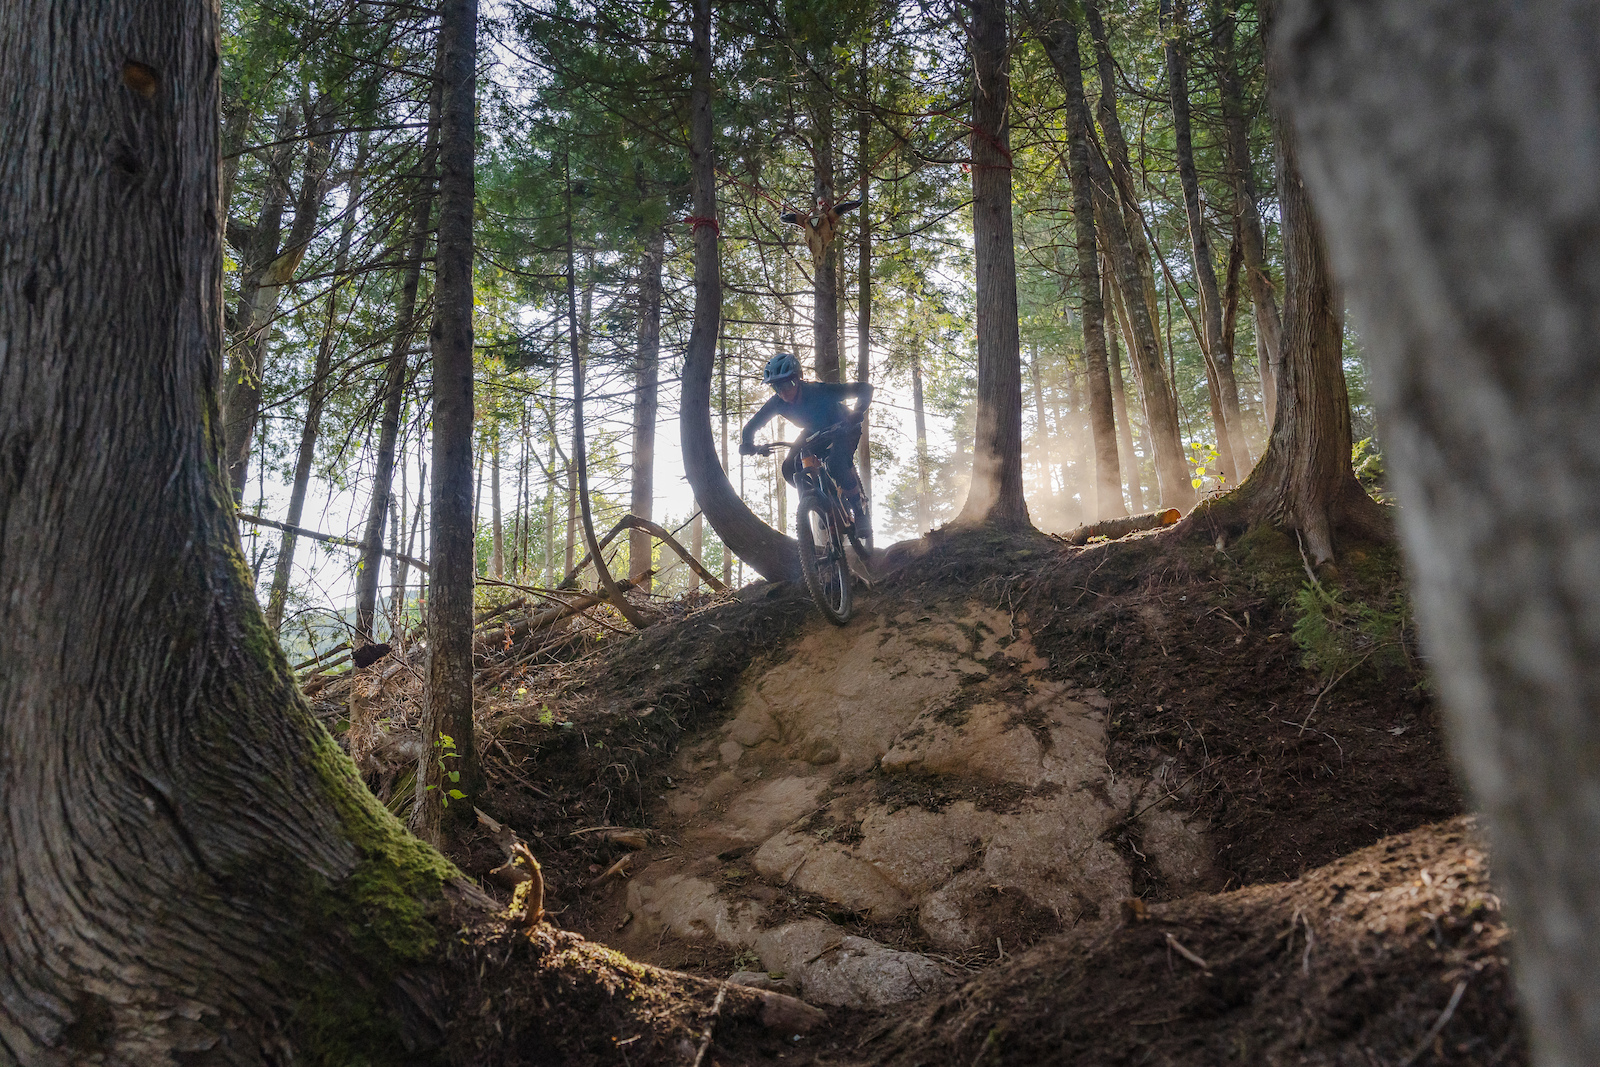 Mountain biking with Christina Chappetta and Jason Lucas at Le Massif de Charlevoix near Quebec City.